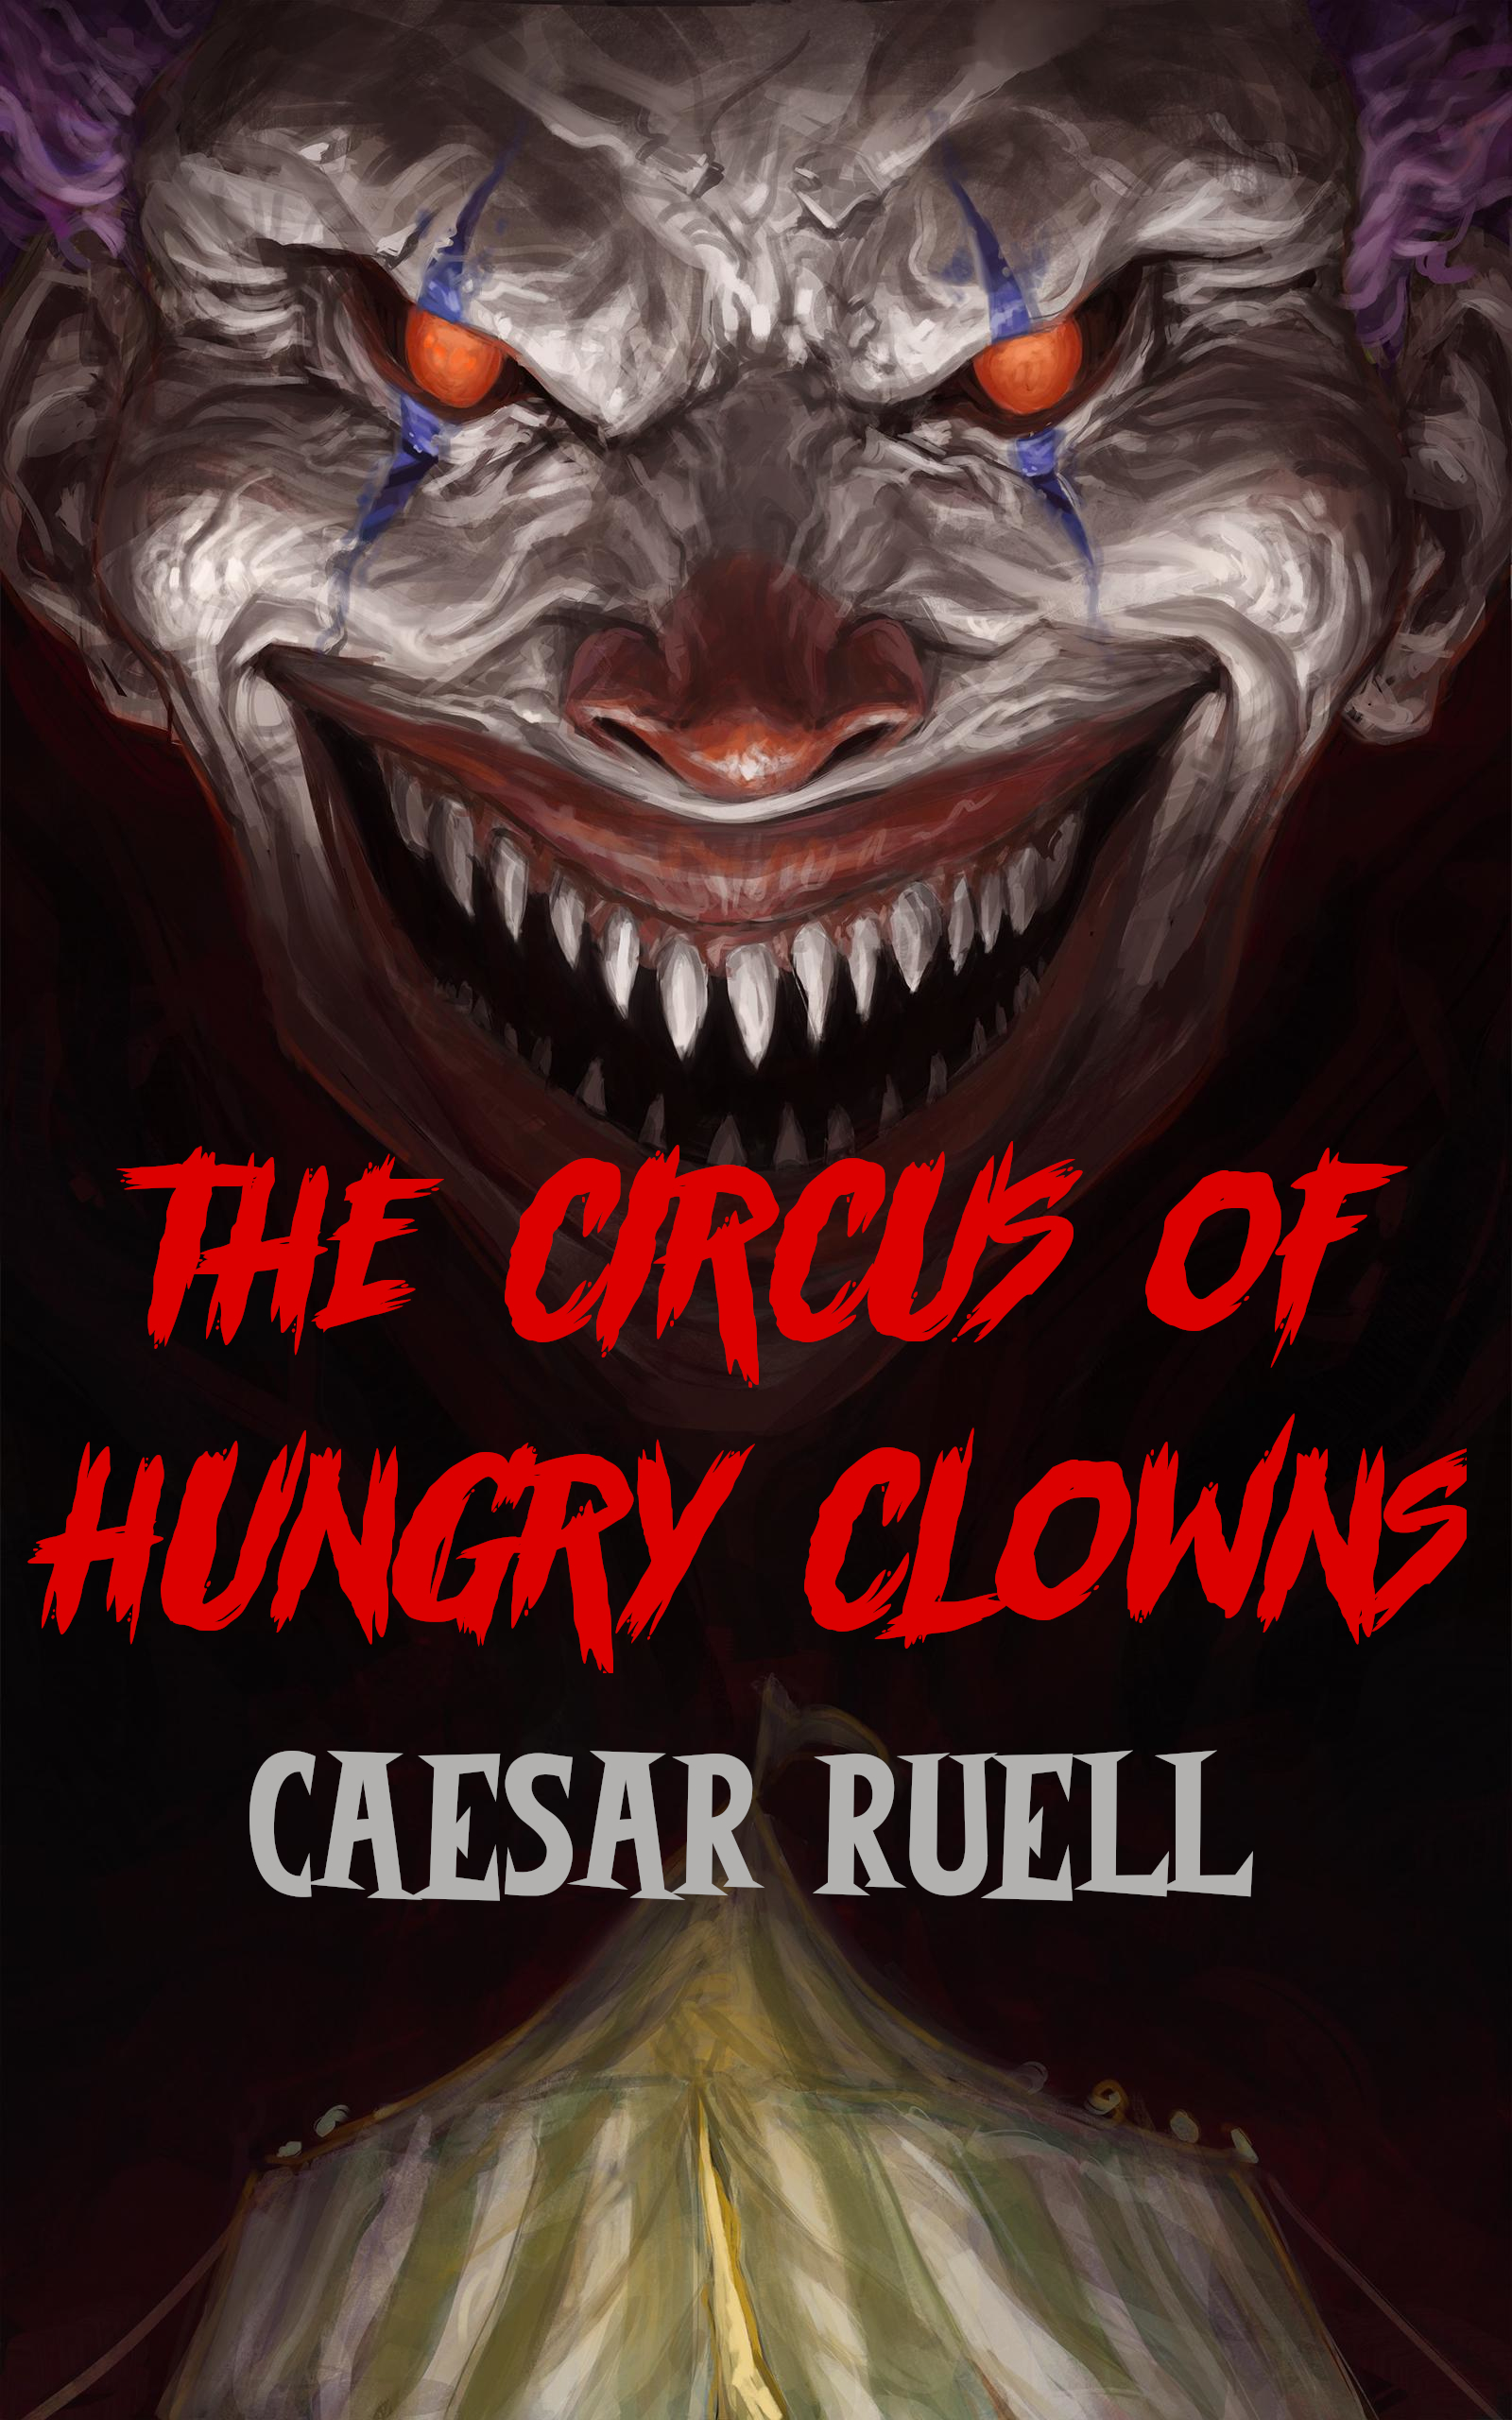 
					Cover art from "The CIrcus of Hungry Clowns" by Caesar Ruell